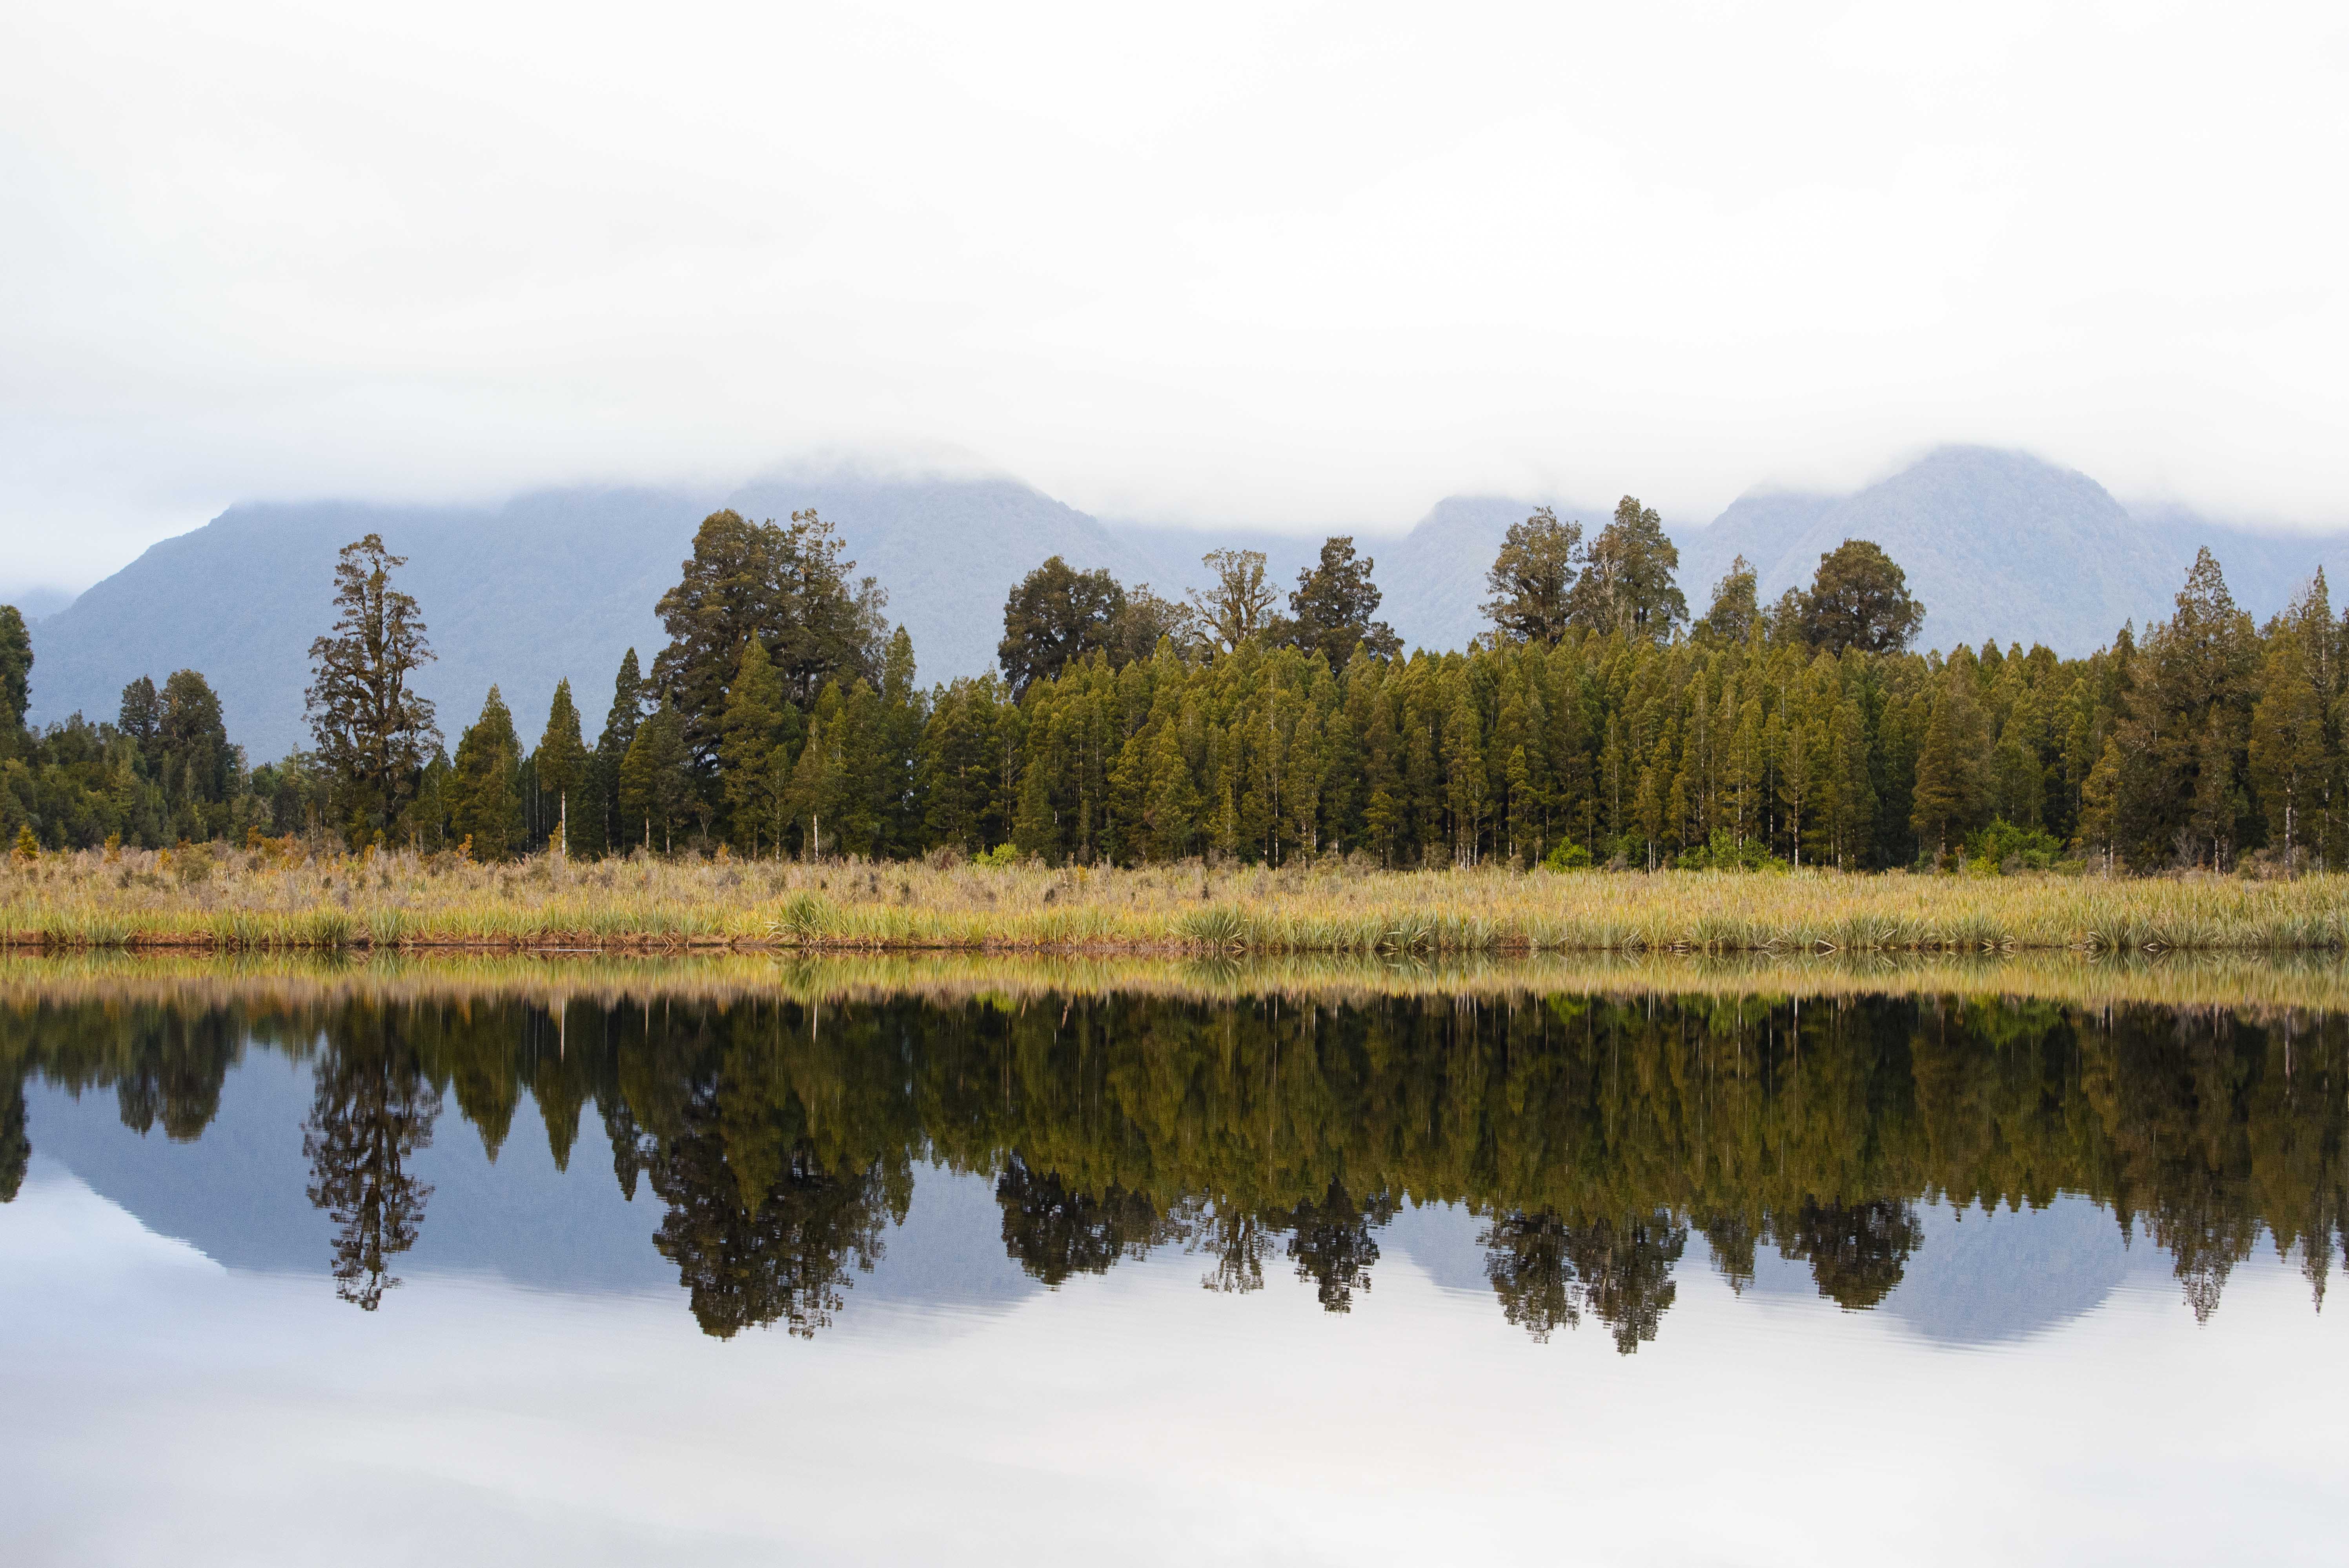 A photo of a row of trees with their reflection on a clear, glassy lake.